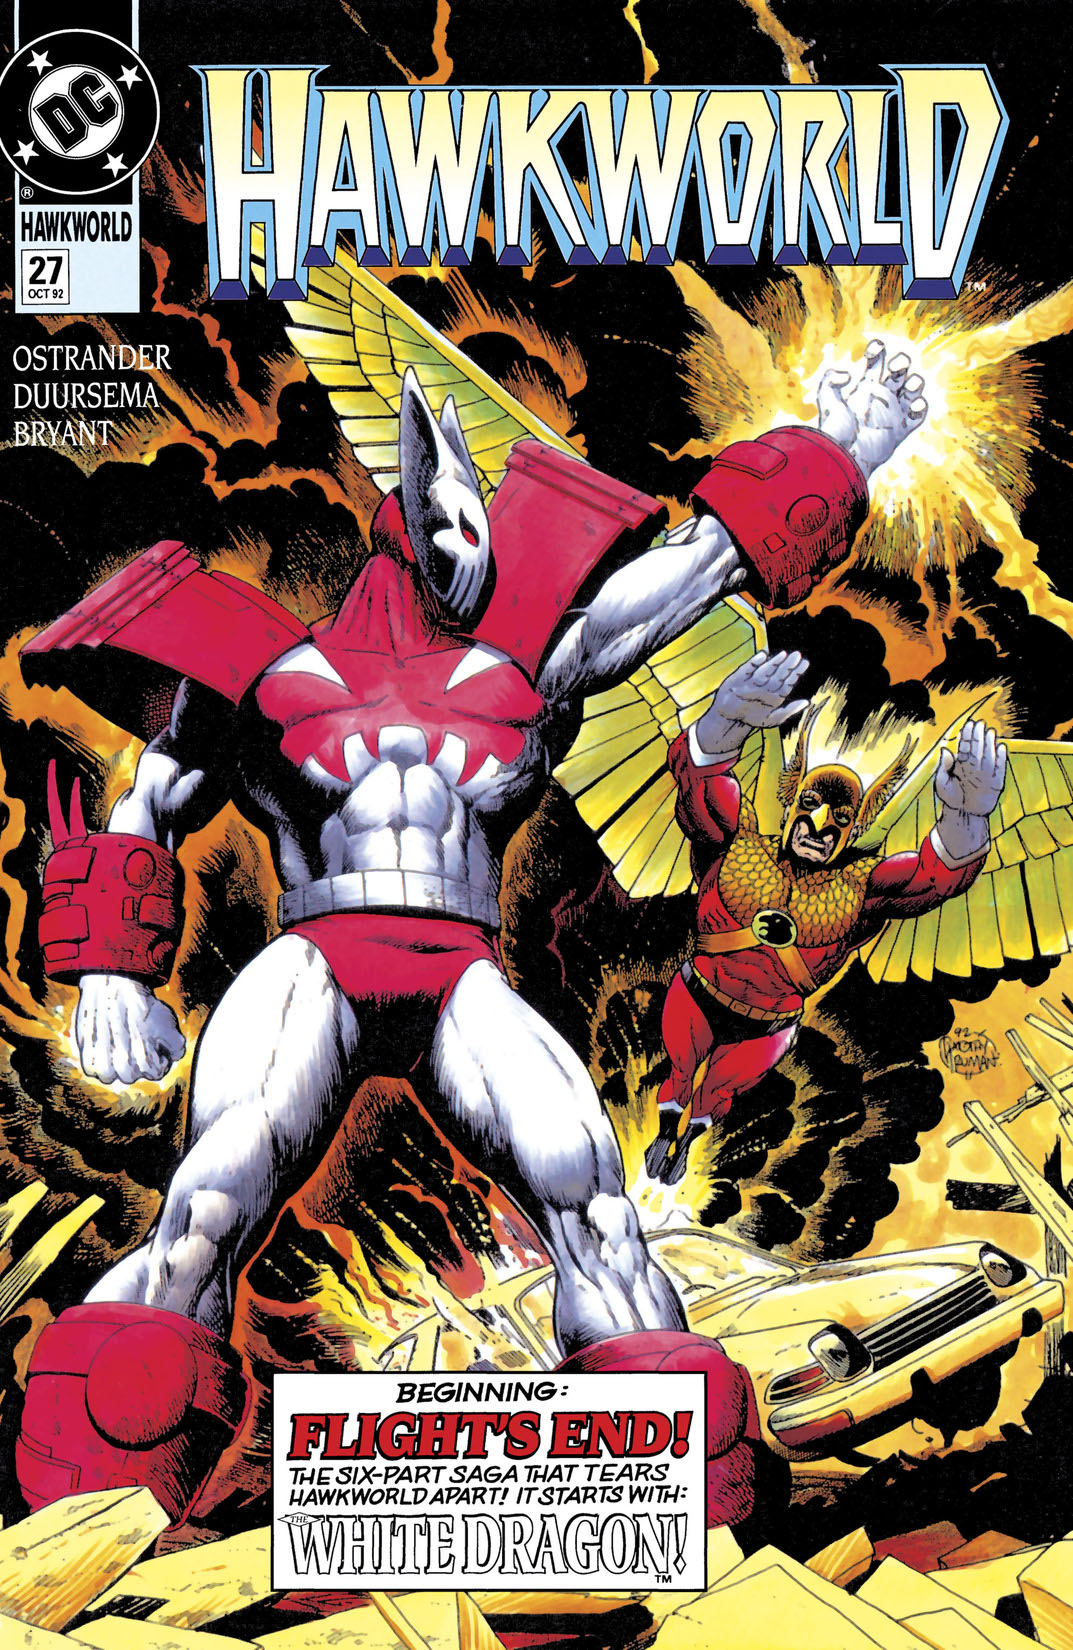 Hawkworld (1989-) #27 preview images